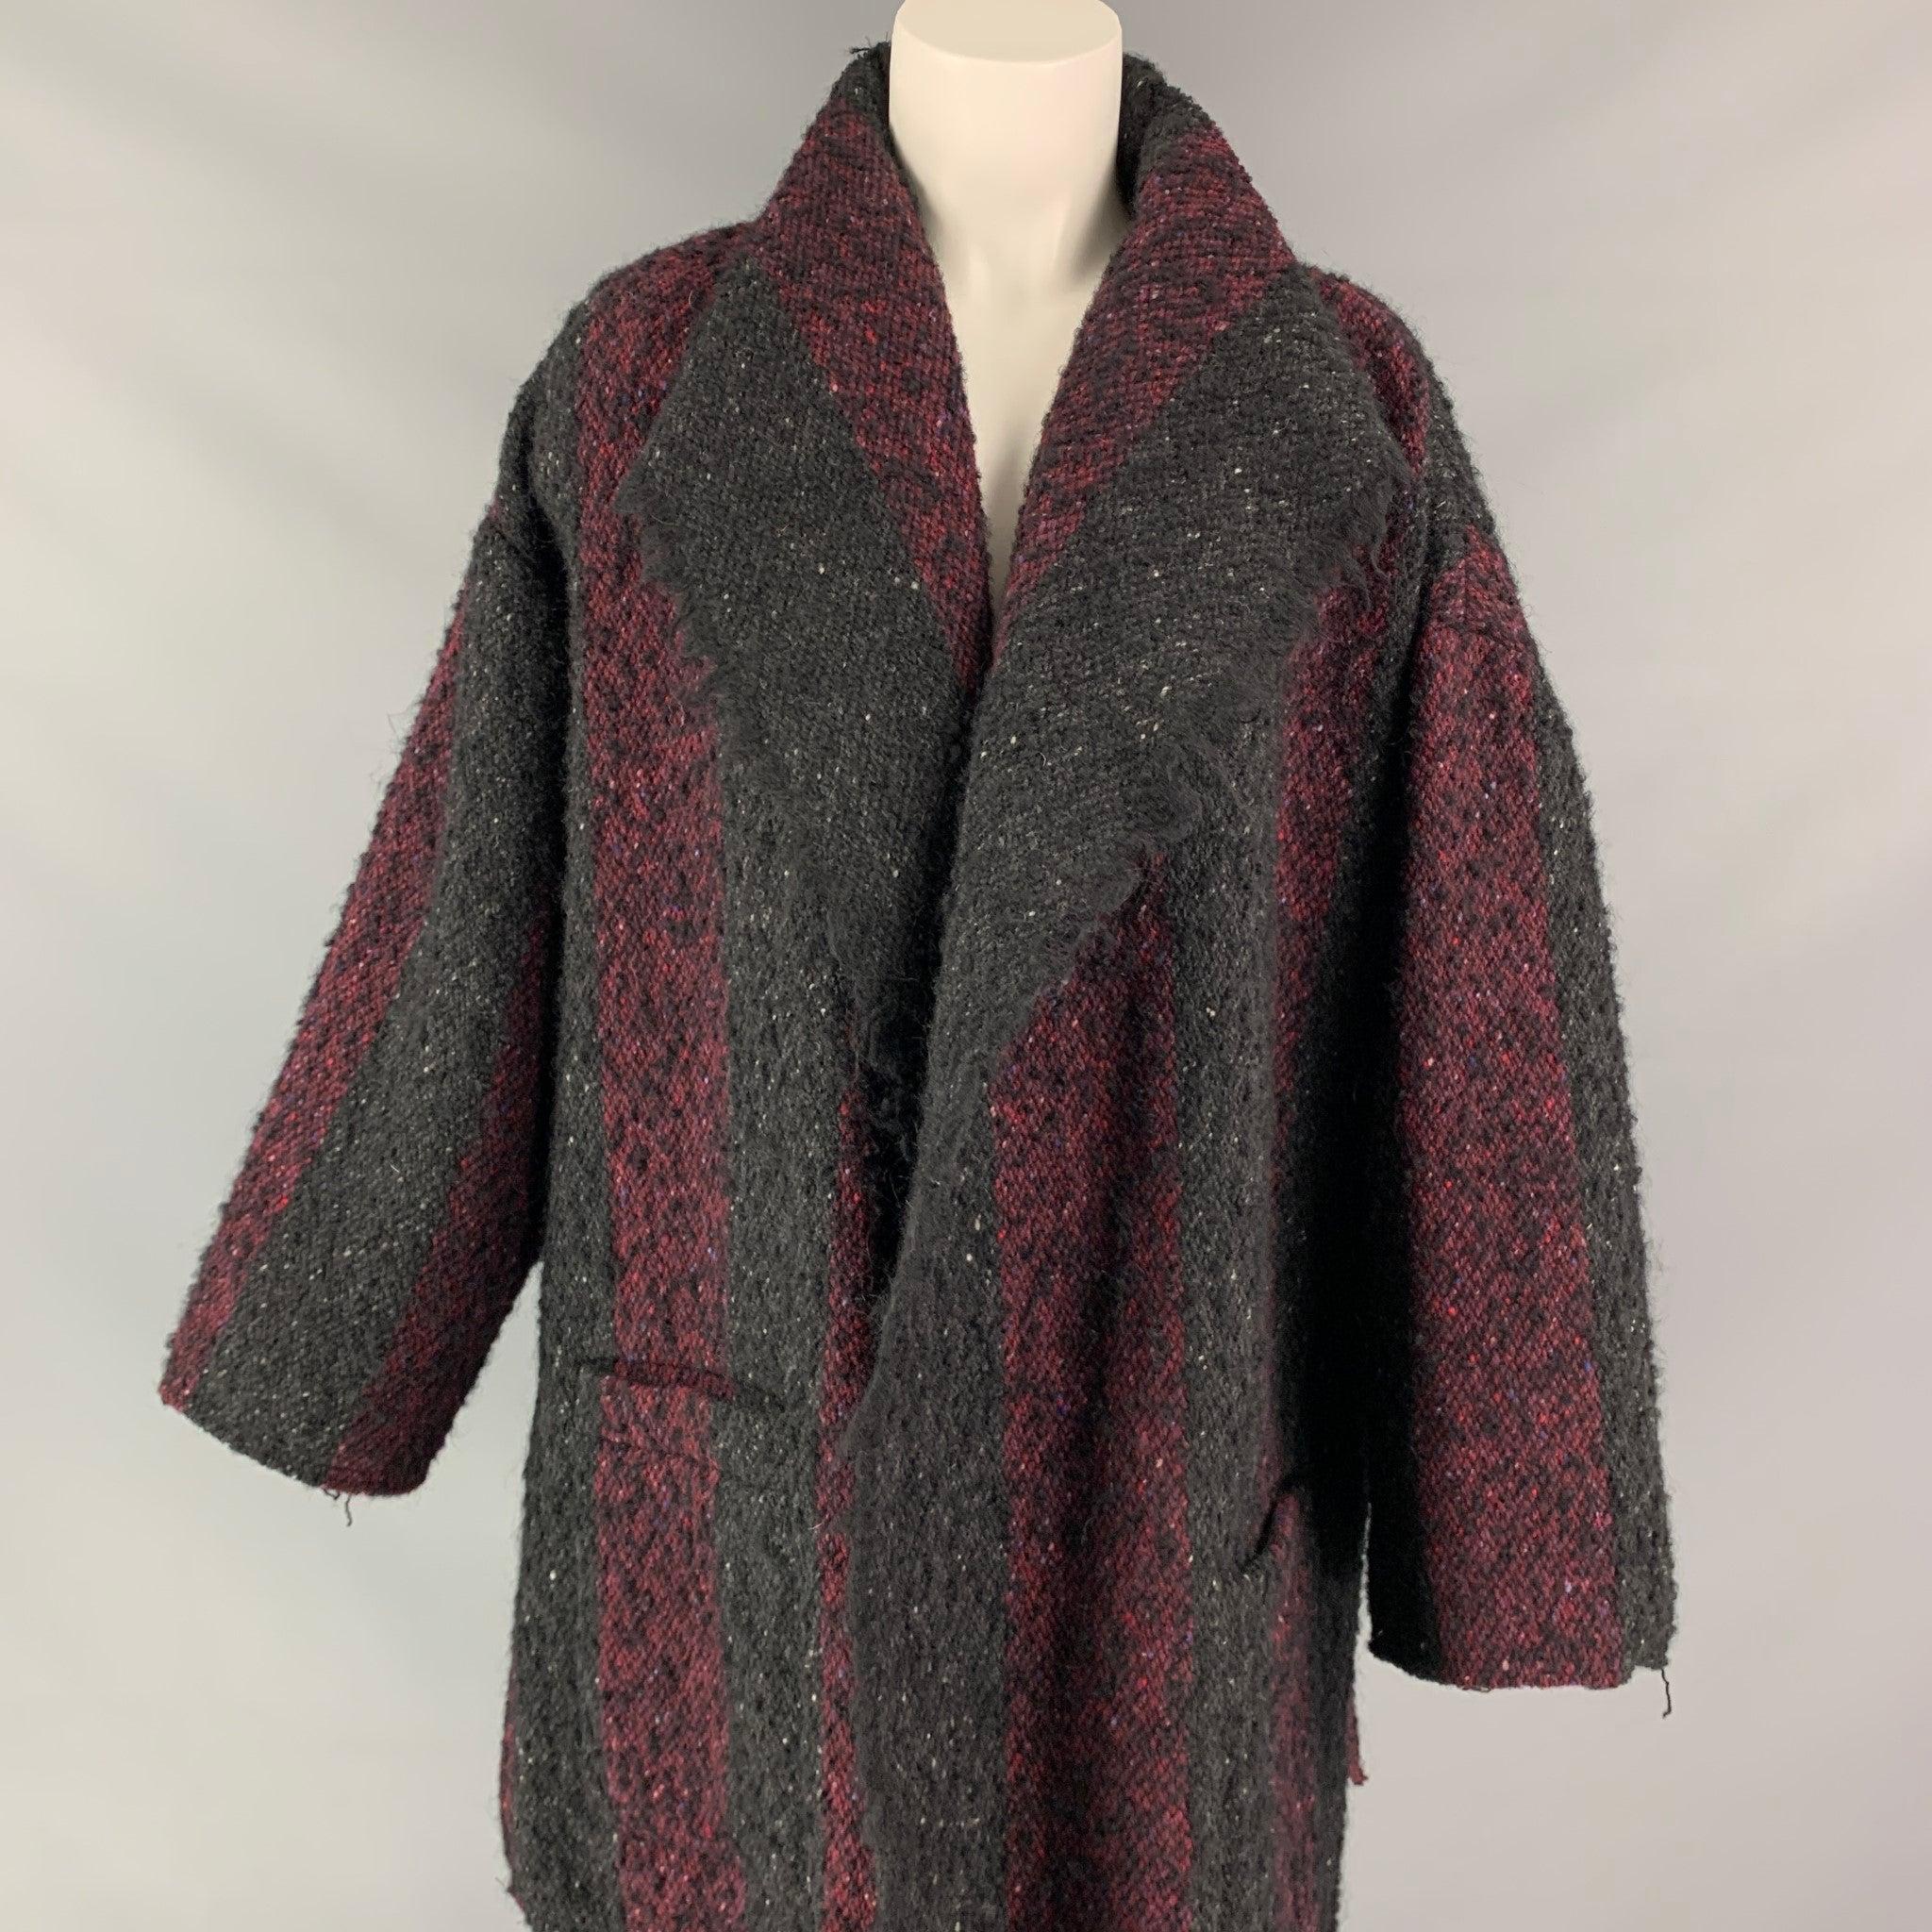 IRO coat comes in a black & burgundy stripe wool blend featuring fa oversized fit, front pockets and a open front.
Very Good
Pre-Owned Condition. 

Marked:  38 

Measurements: 
 
Shoulder: 25 inches Bust: 44 inches Sleeve: 18Length: 30 inches 
 
 
